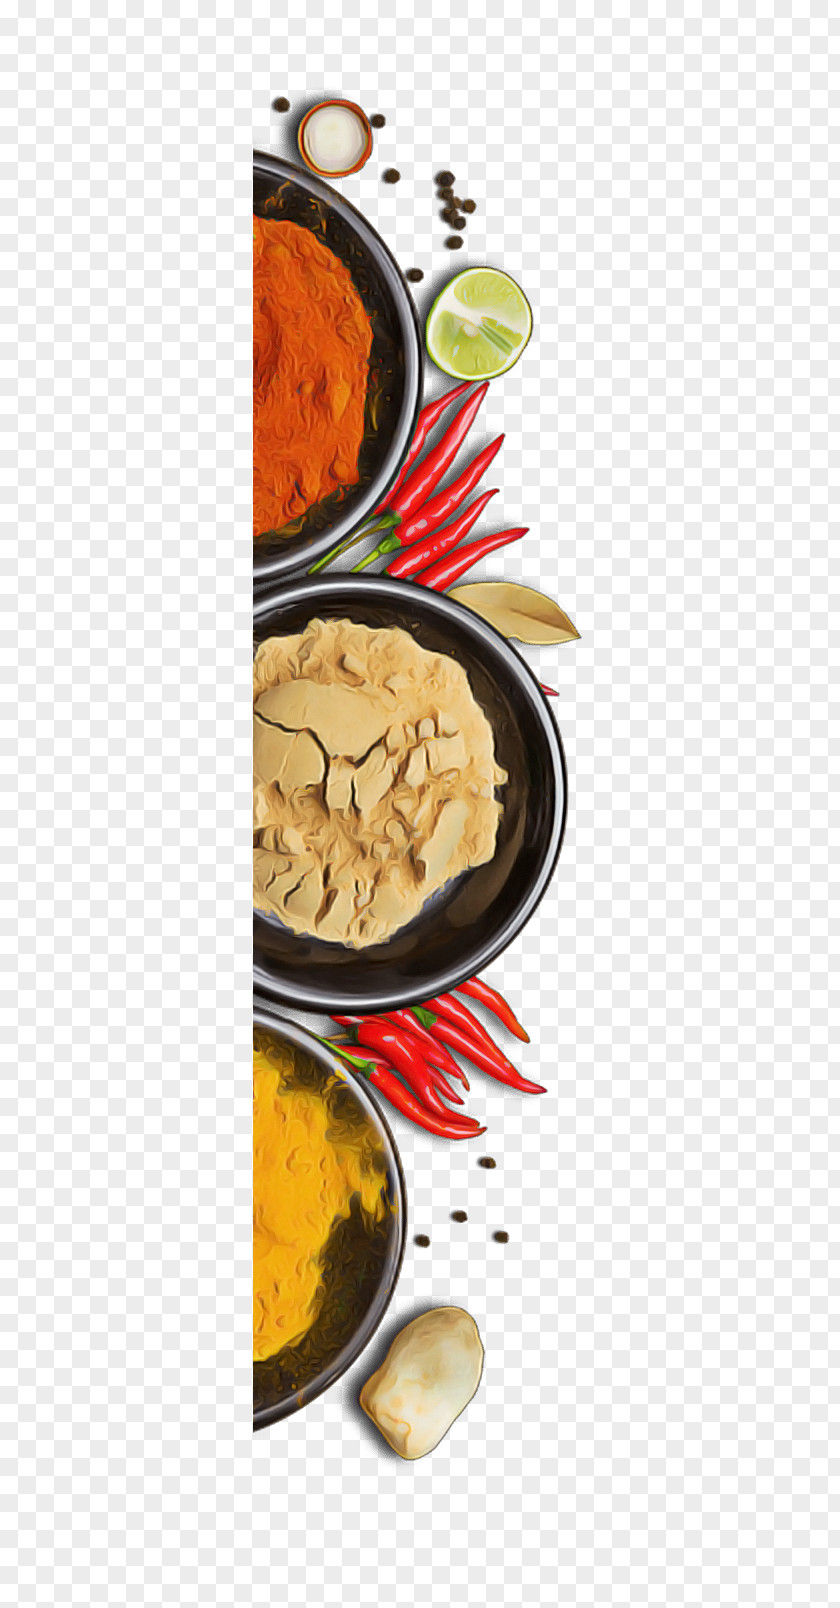 Indian Cuisine Vegetarian Cookware And Bakeware Condiment PNG